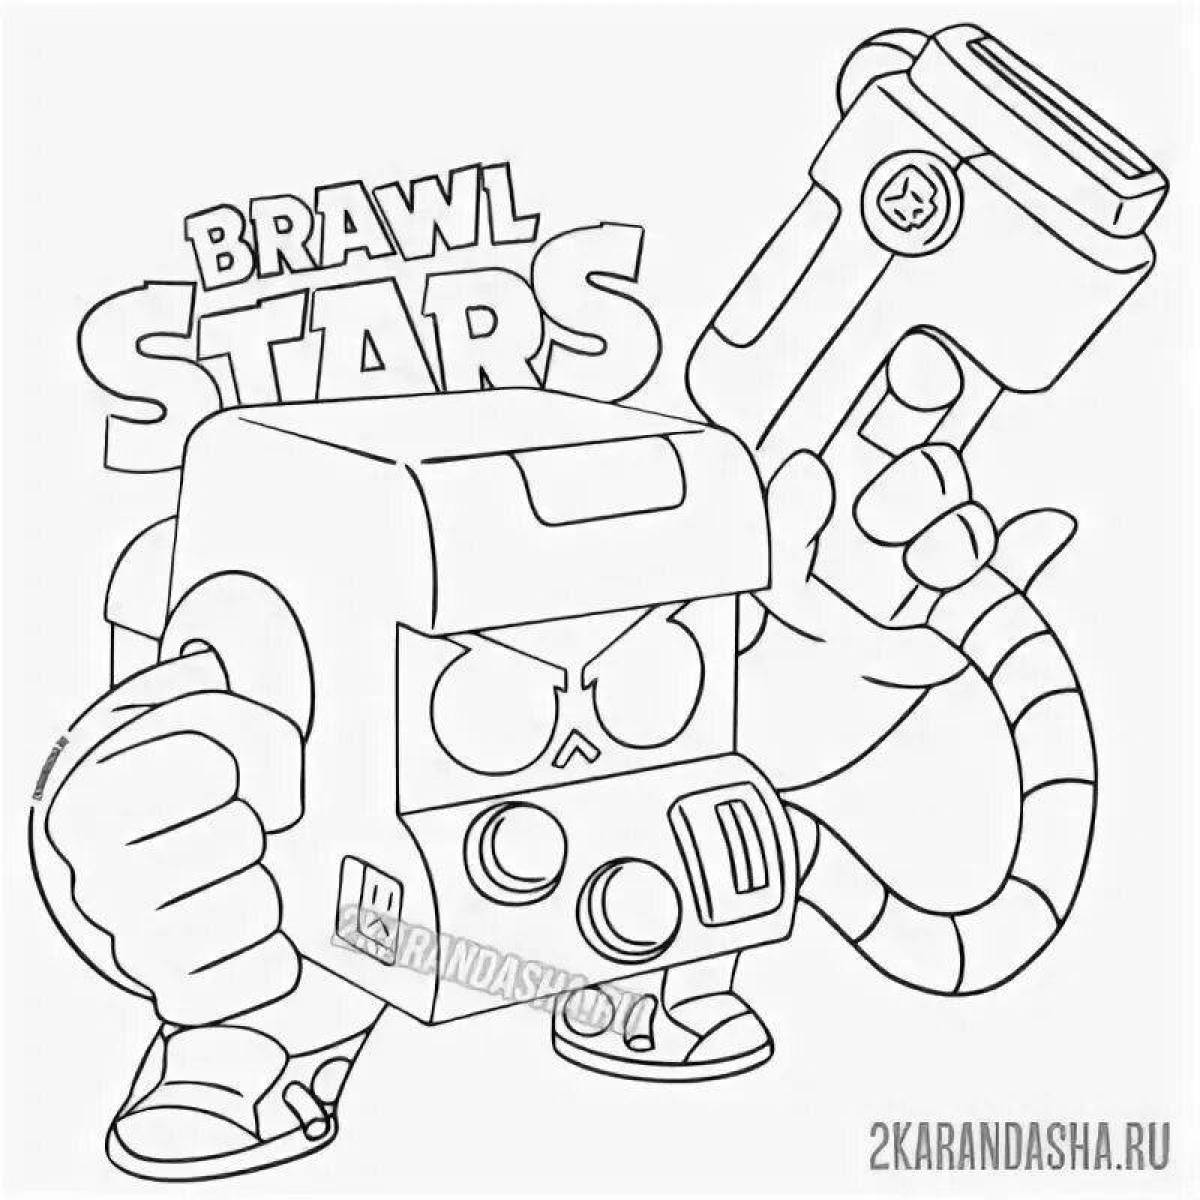 Great coloring from brawl stars 8 bit